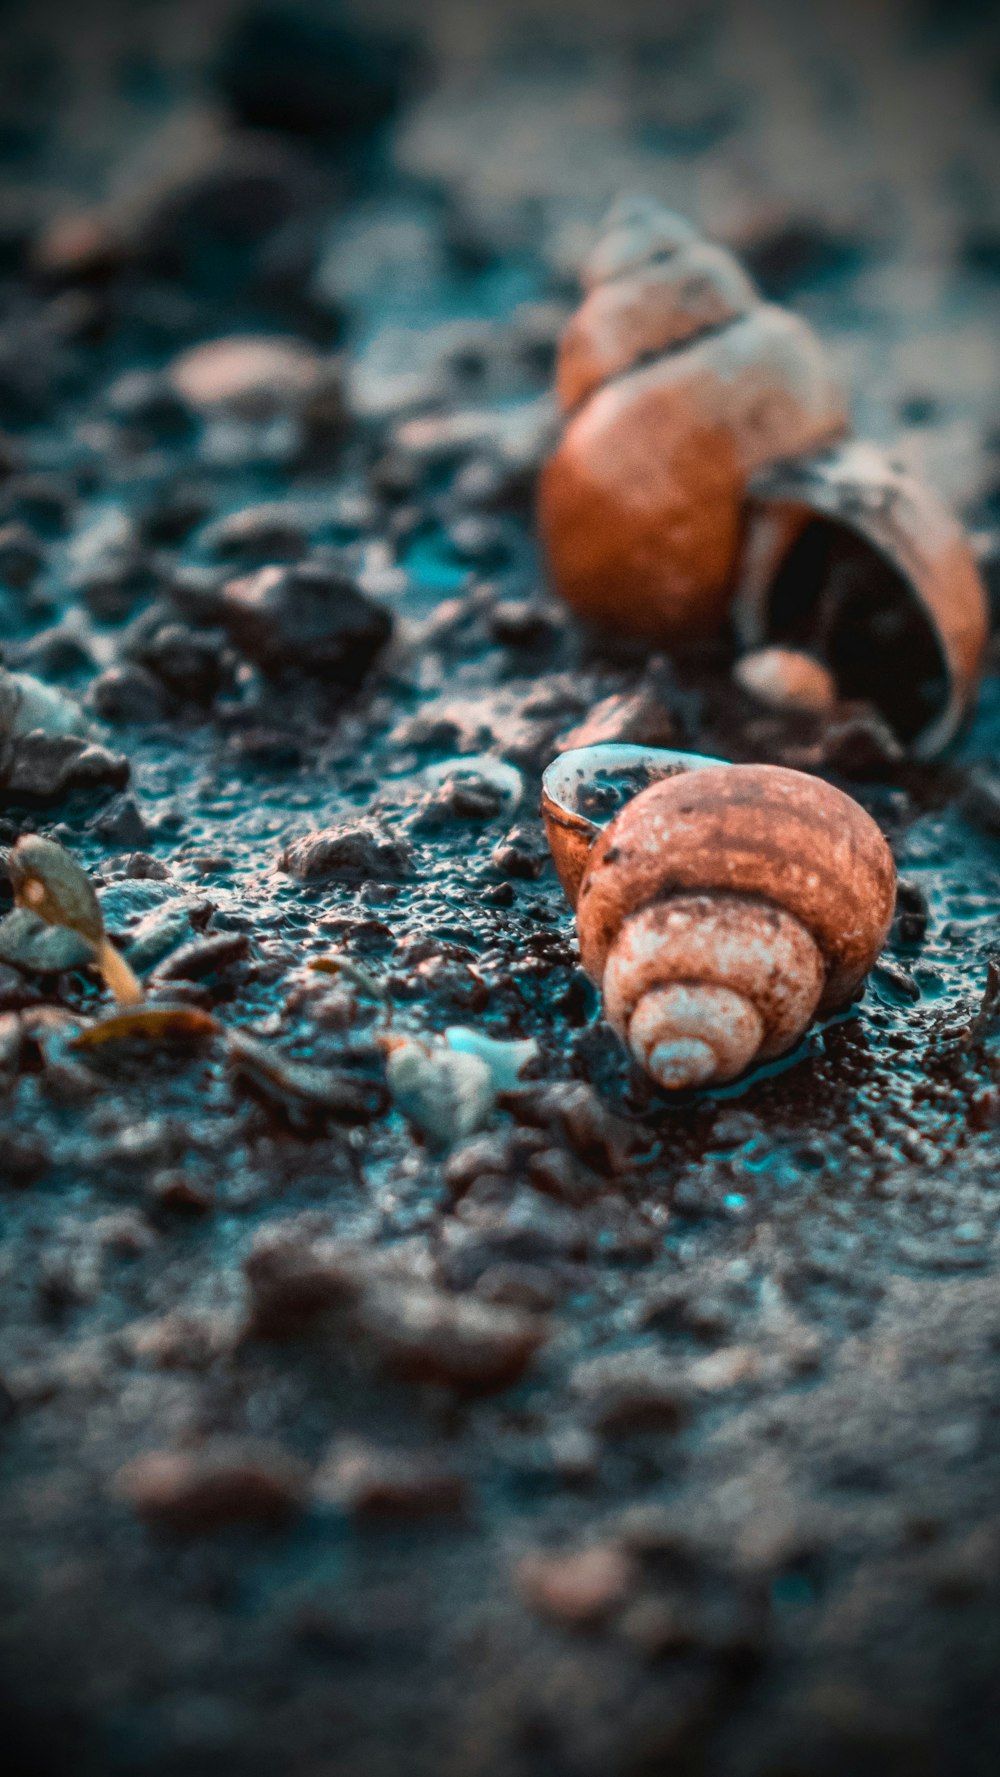 two snails on soil ground